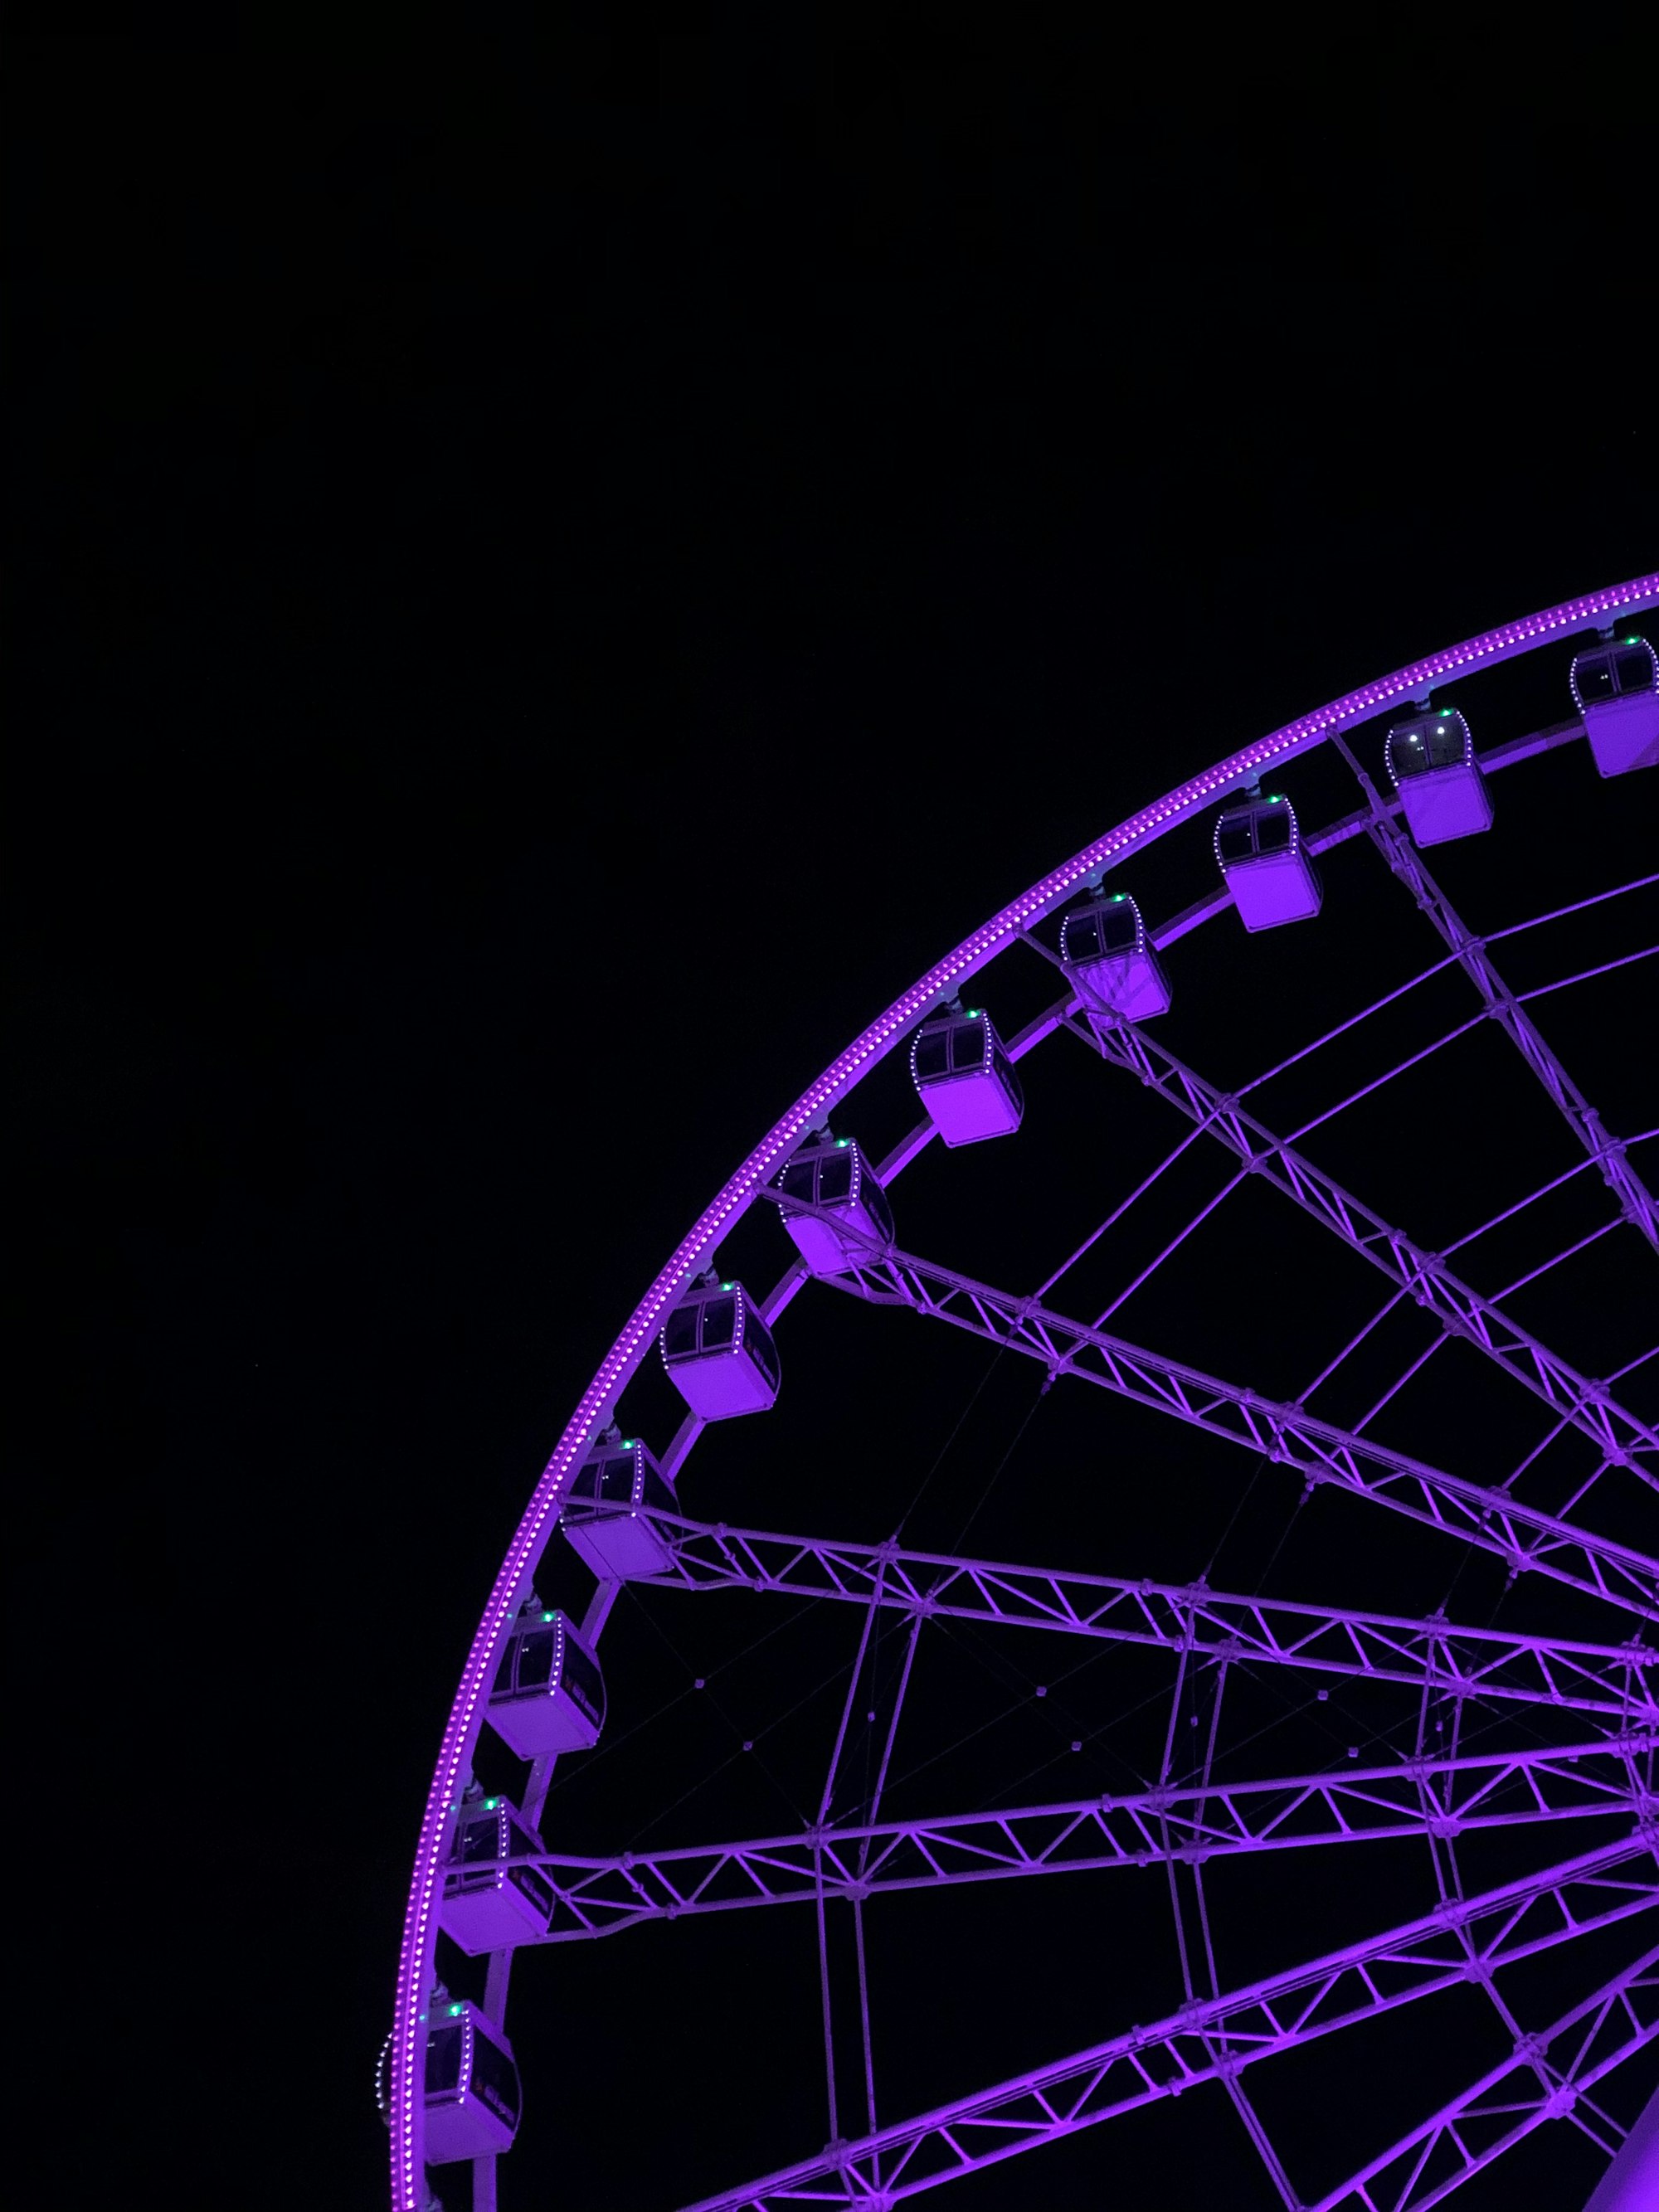 Montreal has some color bridges and ferris wheels.